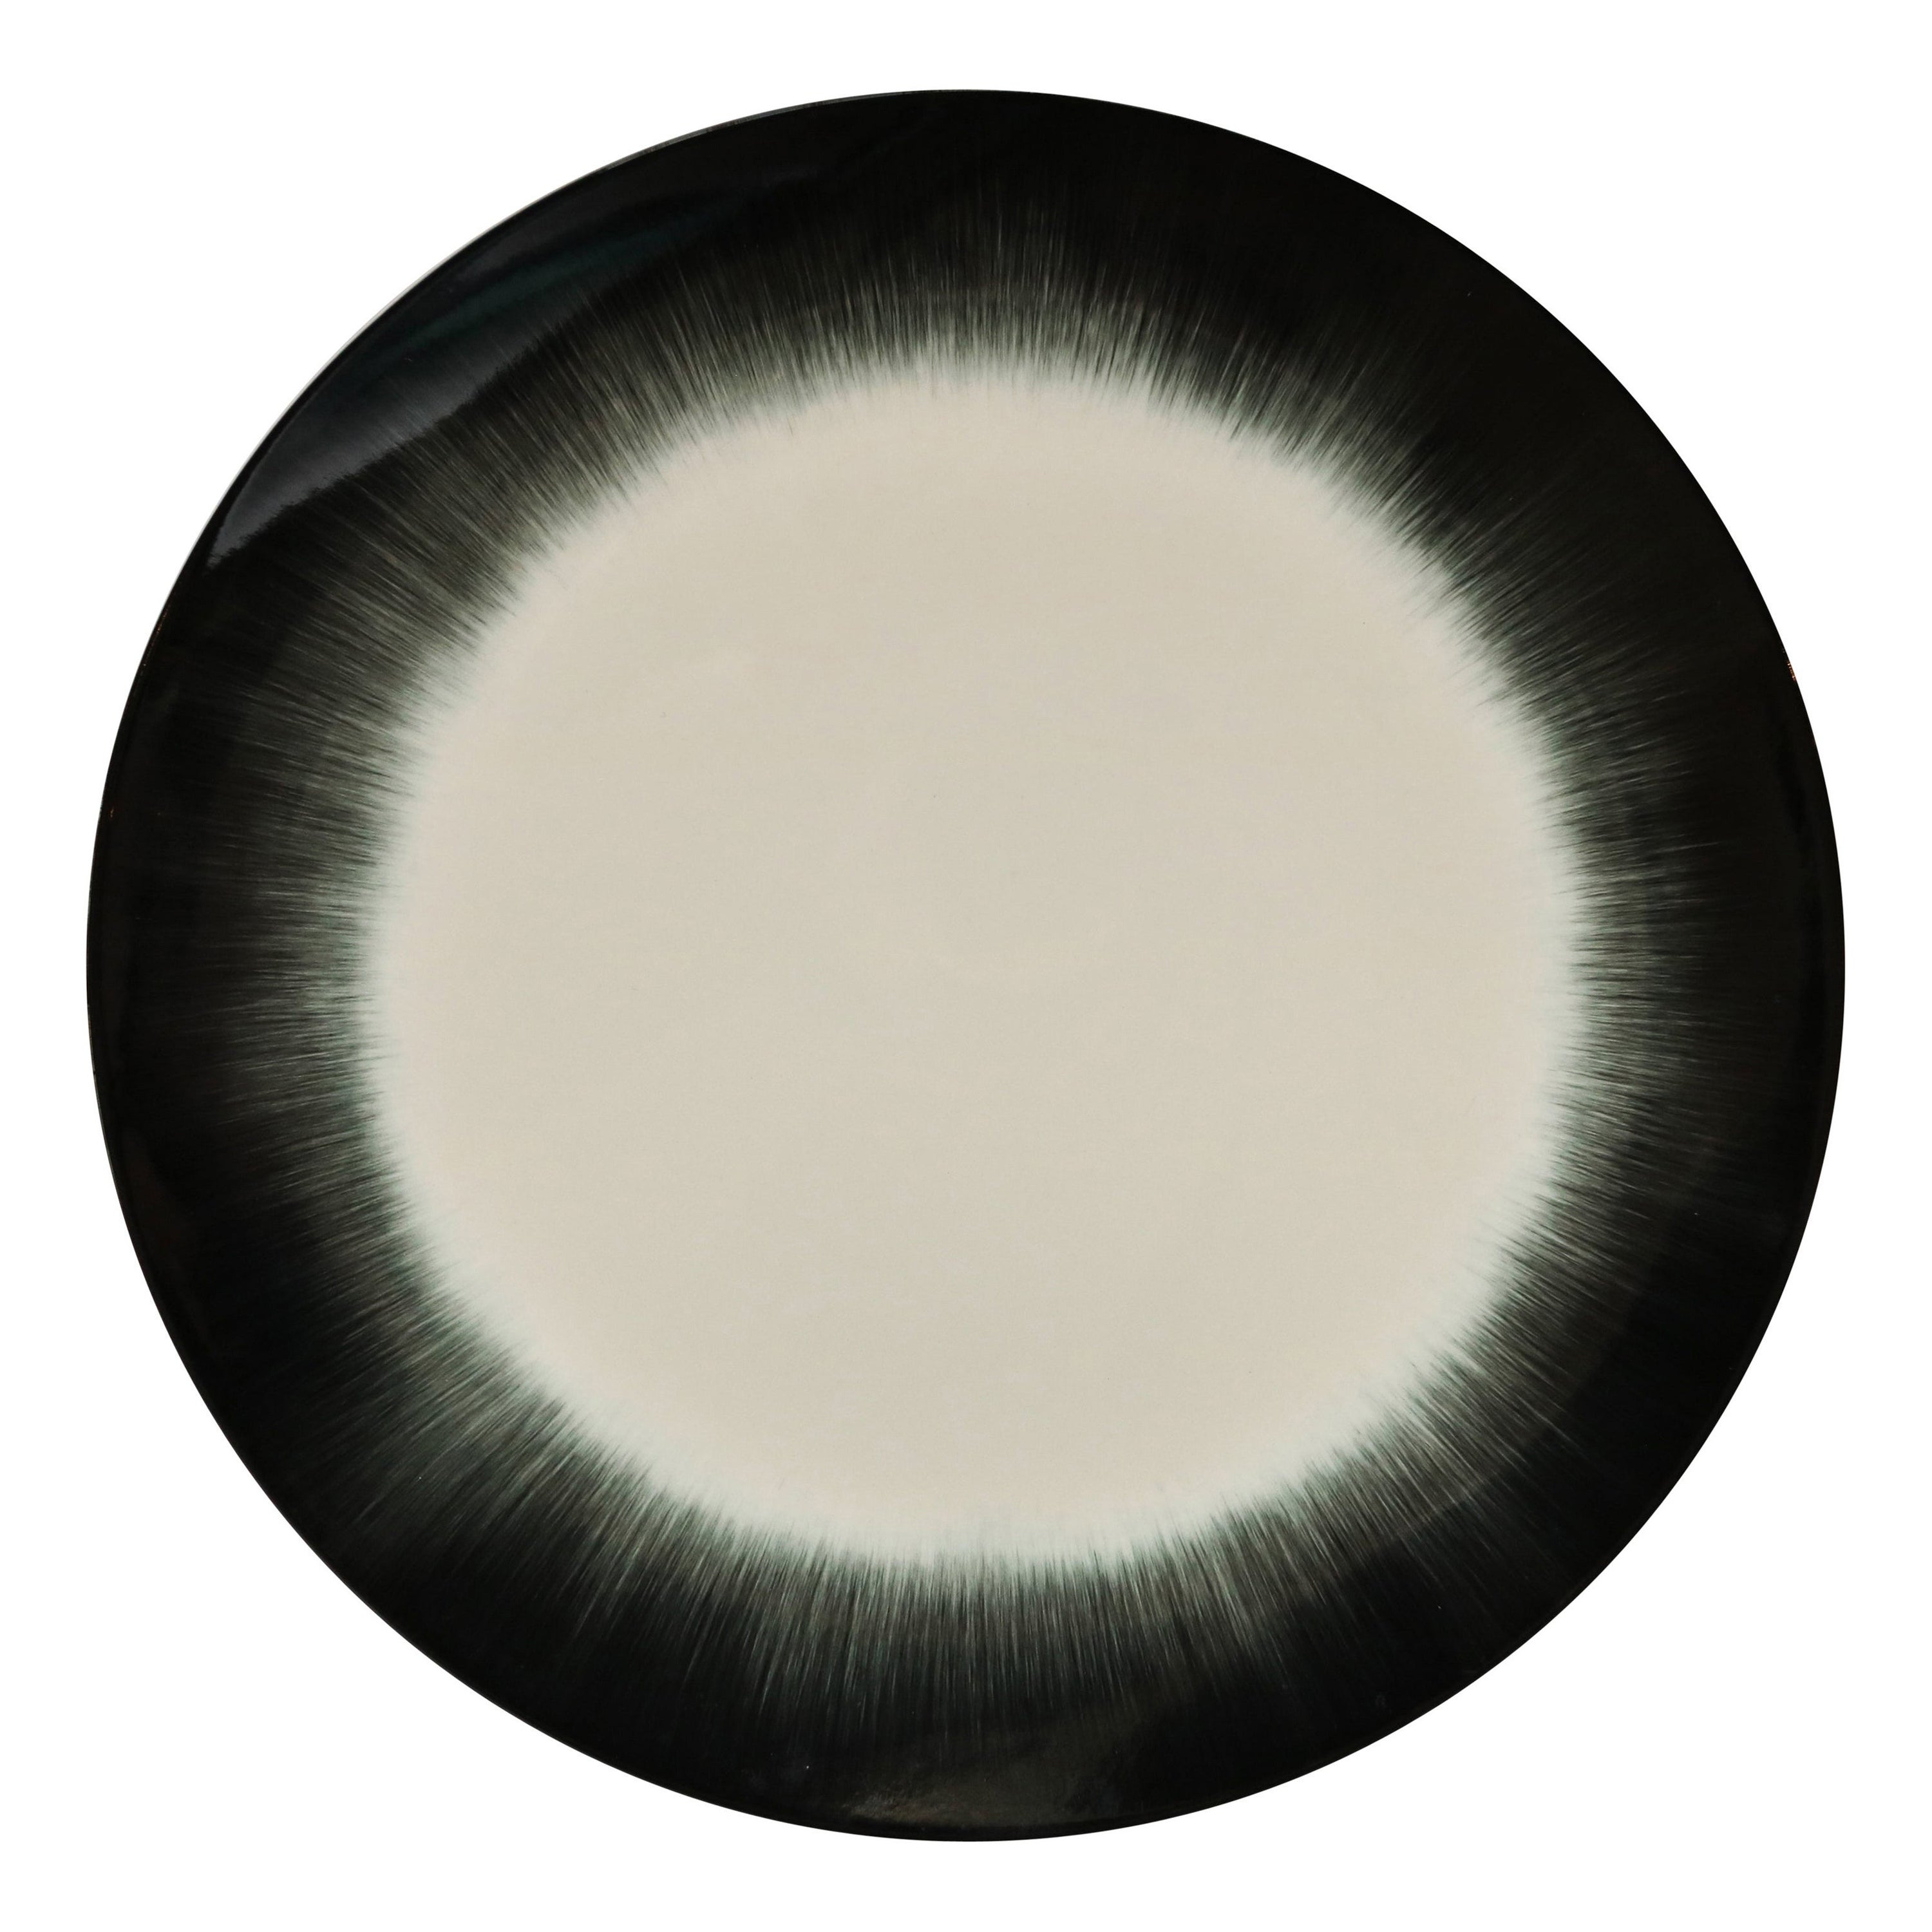 Ann Demeulemeester for Serax Dé Dinner Plate / Charger in off White / Black